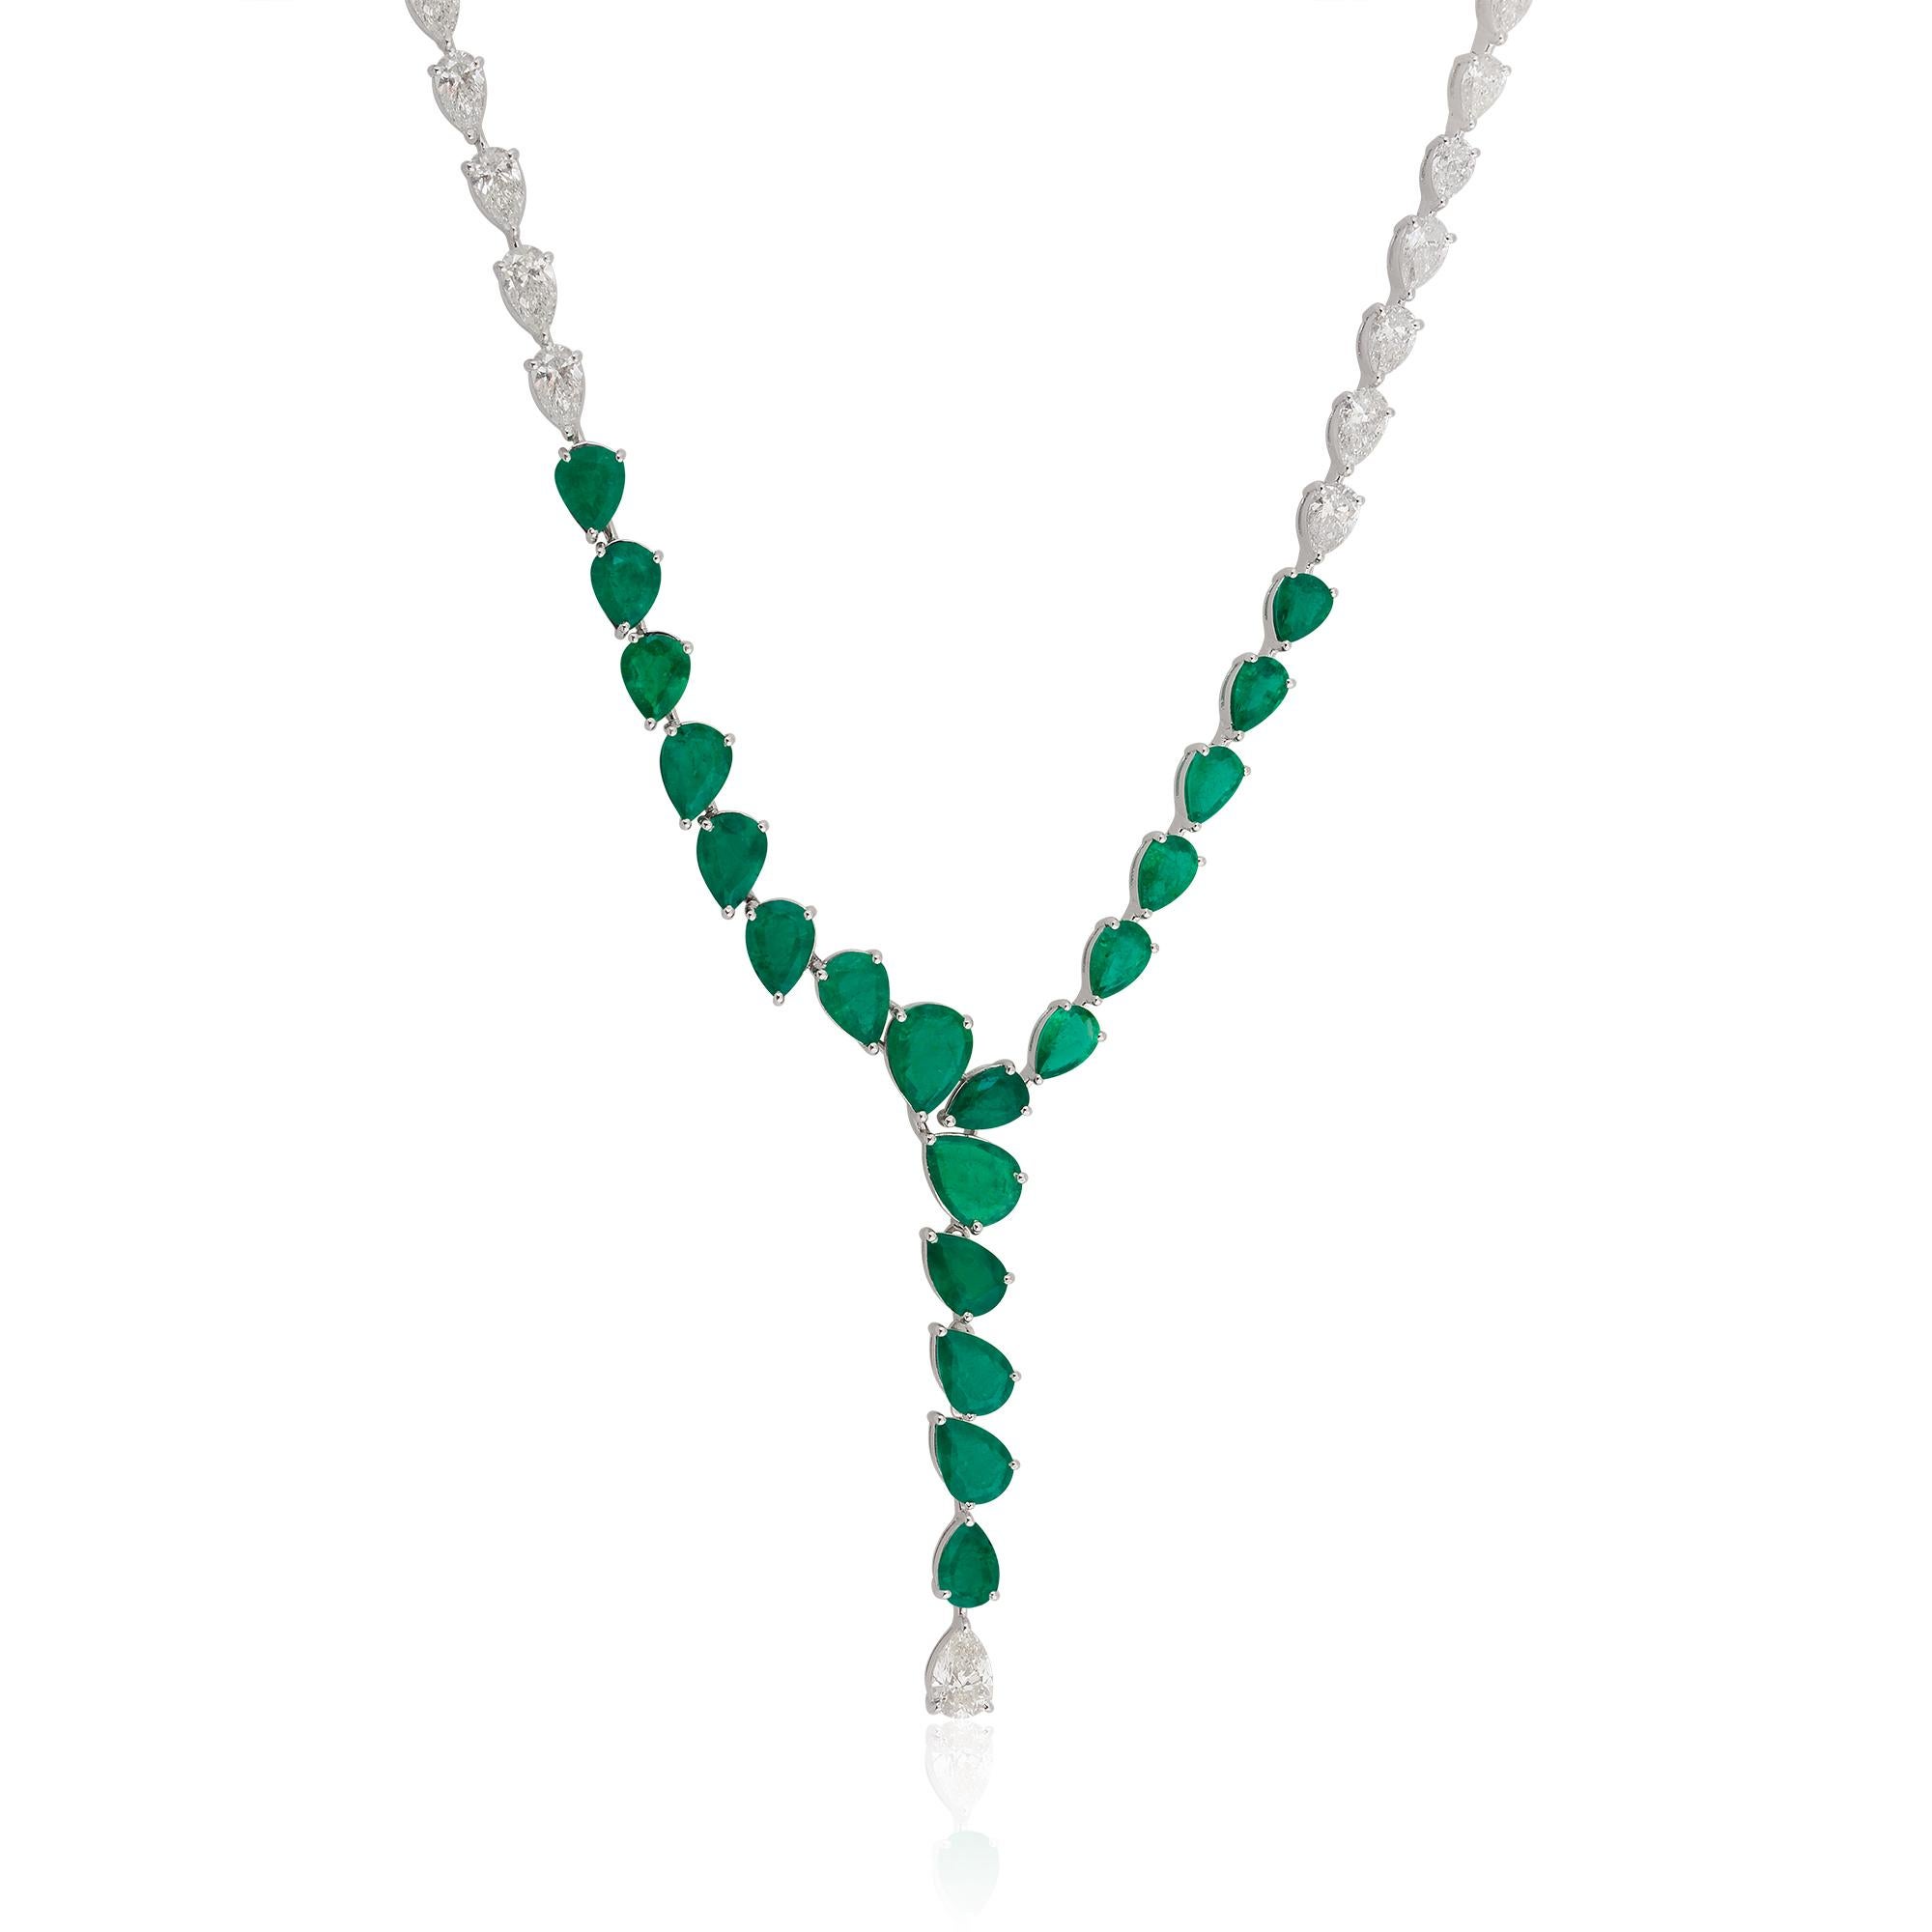 A necklace featuring a pear-shaped Zambian emerald gemstone and diamonds in 14 karat white gold is a stunning and luxurious piece of fine jewelry. The necklace typically showcases a single pear-shaped Zambian emerald as the centerpiece, accented by